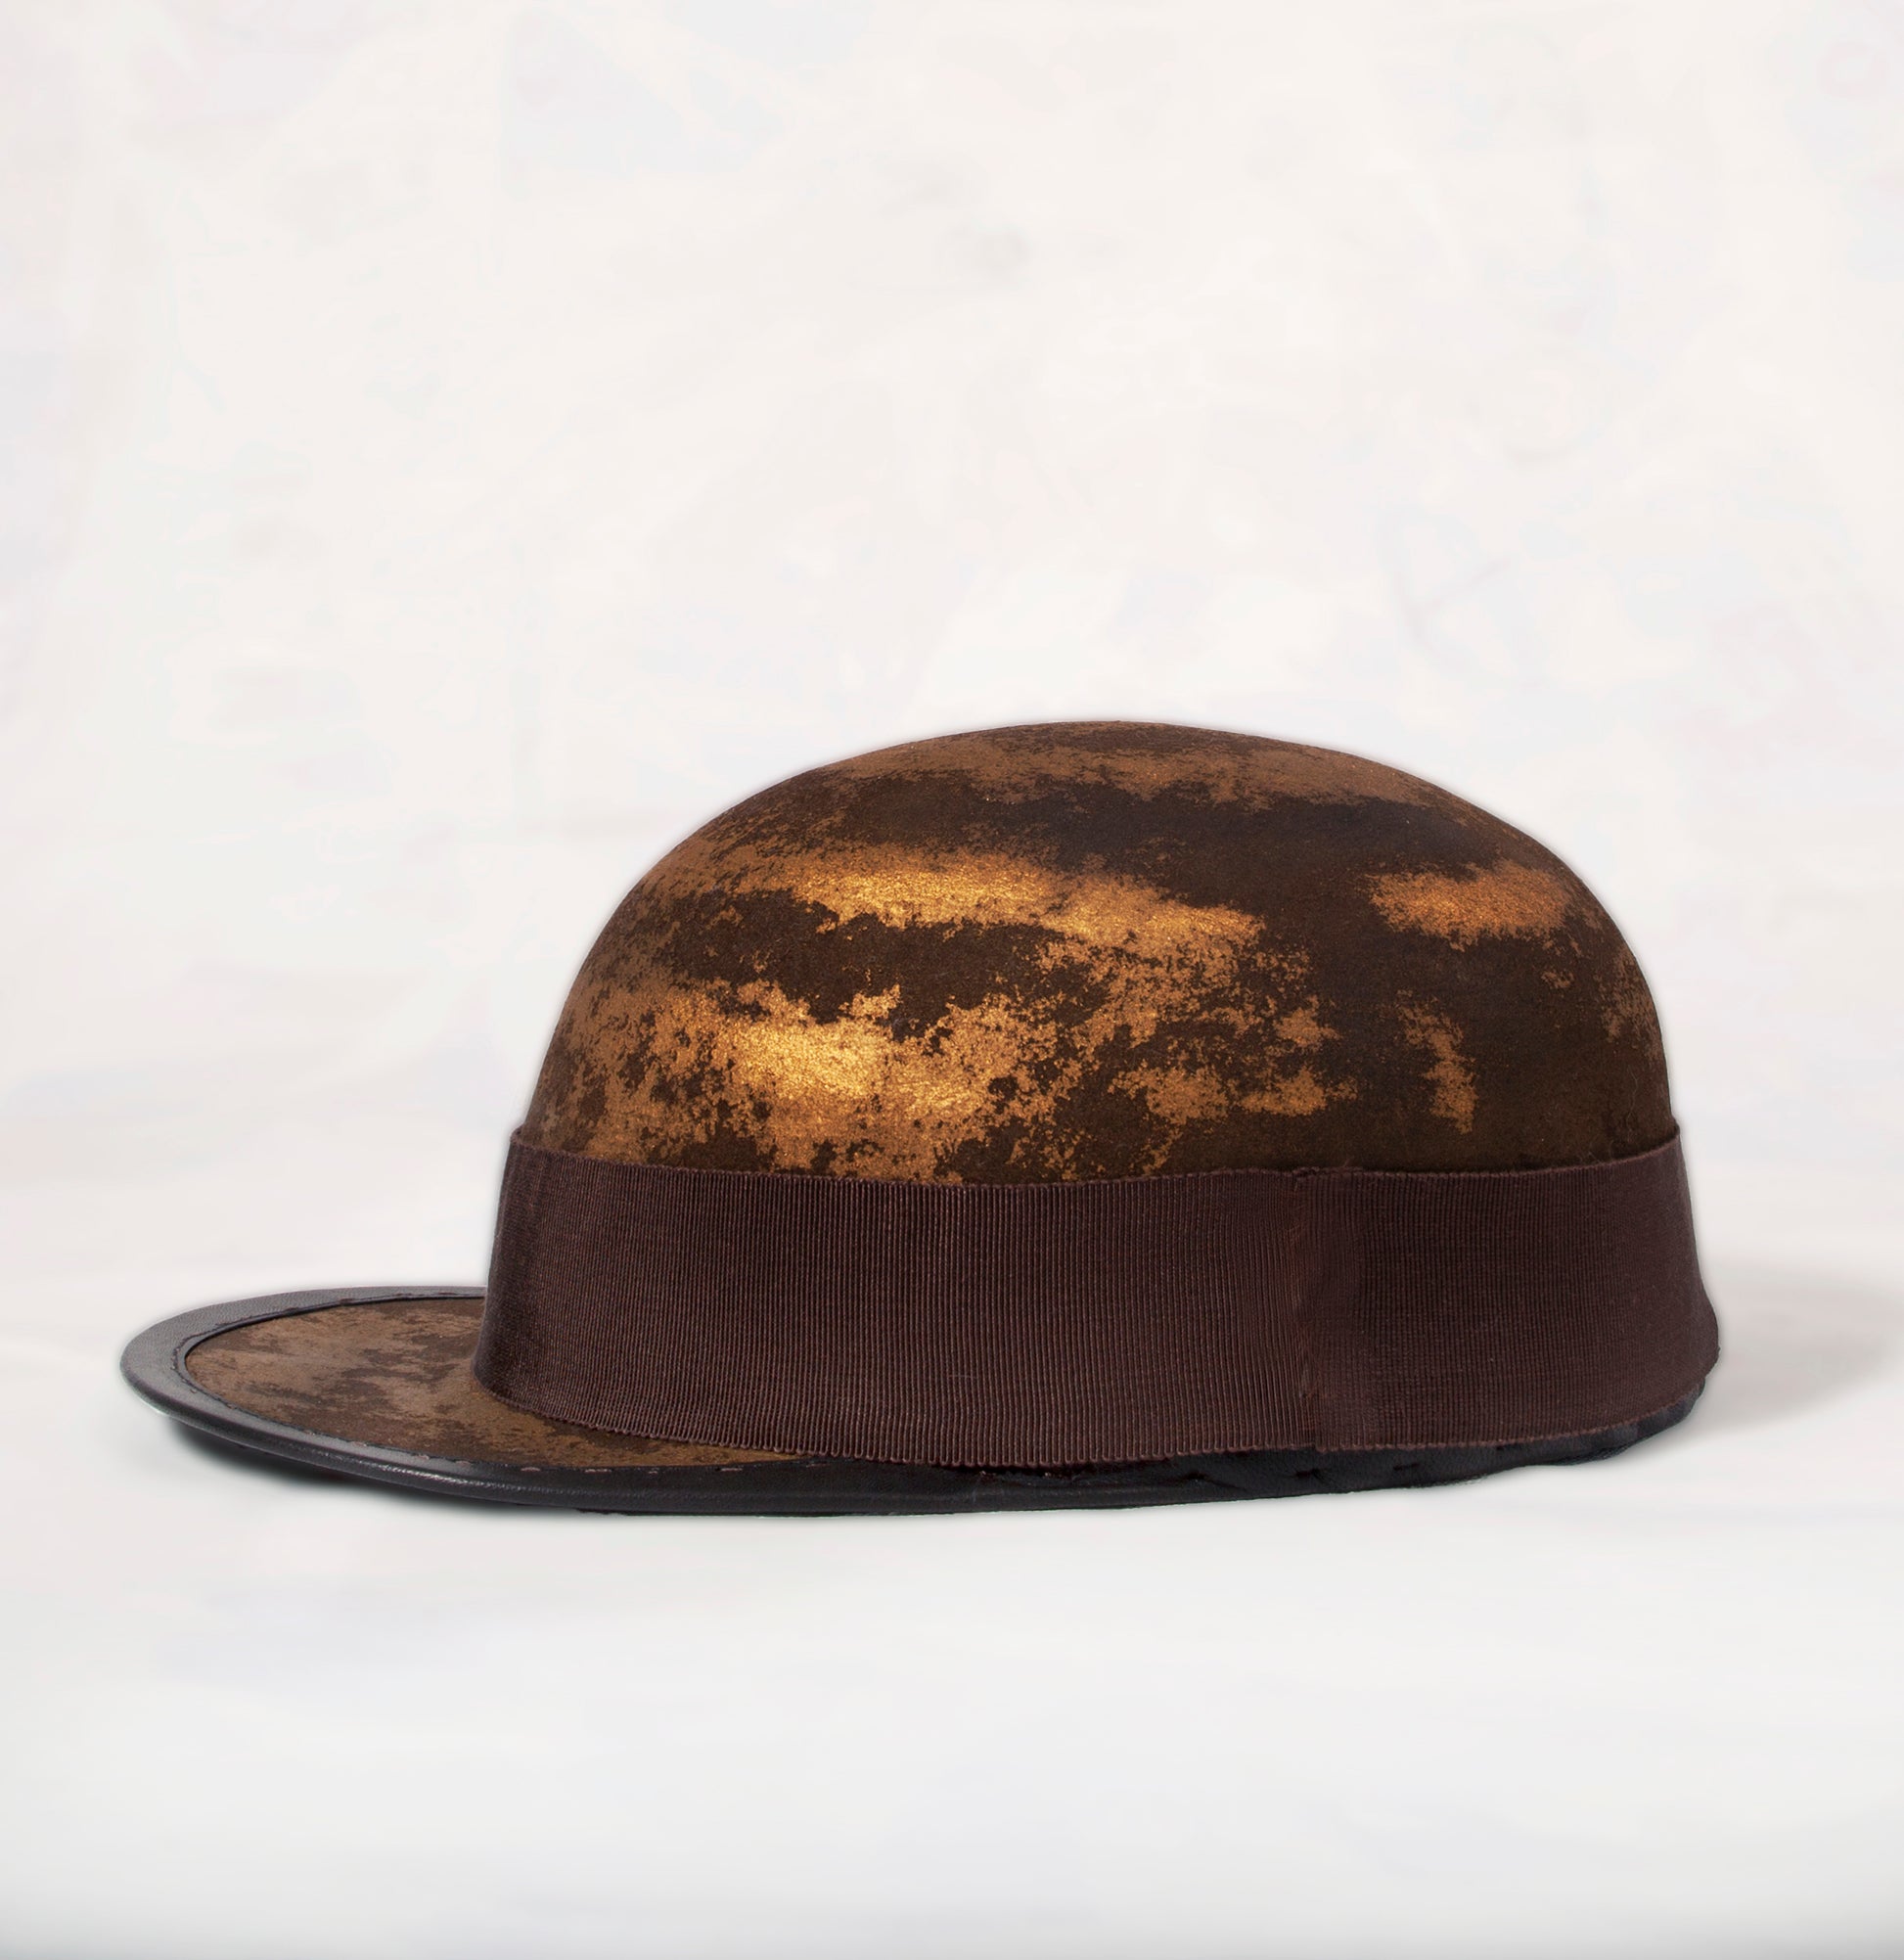 Stan Gaz Handmade 100% beaver fur felt, made in USA.  Hand blocked and shaped. Gold metallic paint and braided leather hat band, leather sweat.  Hat is available in Large. It can be custom made in whatever size needed. 